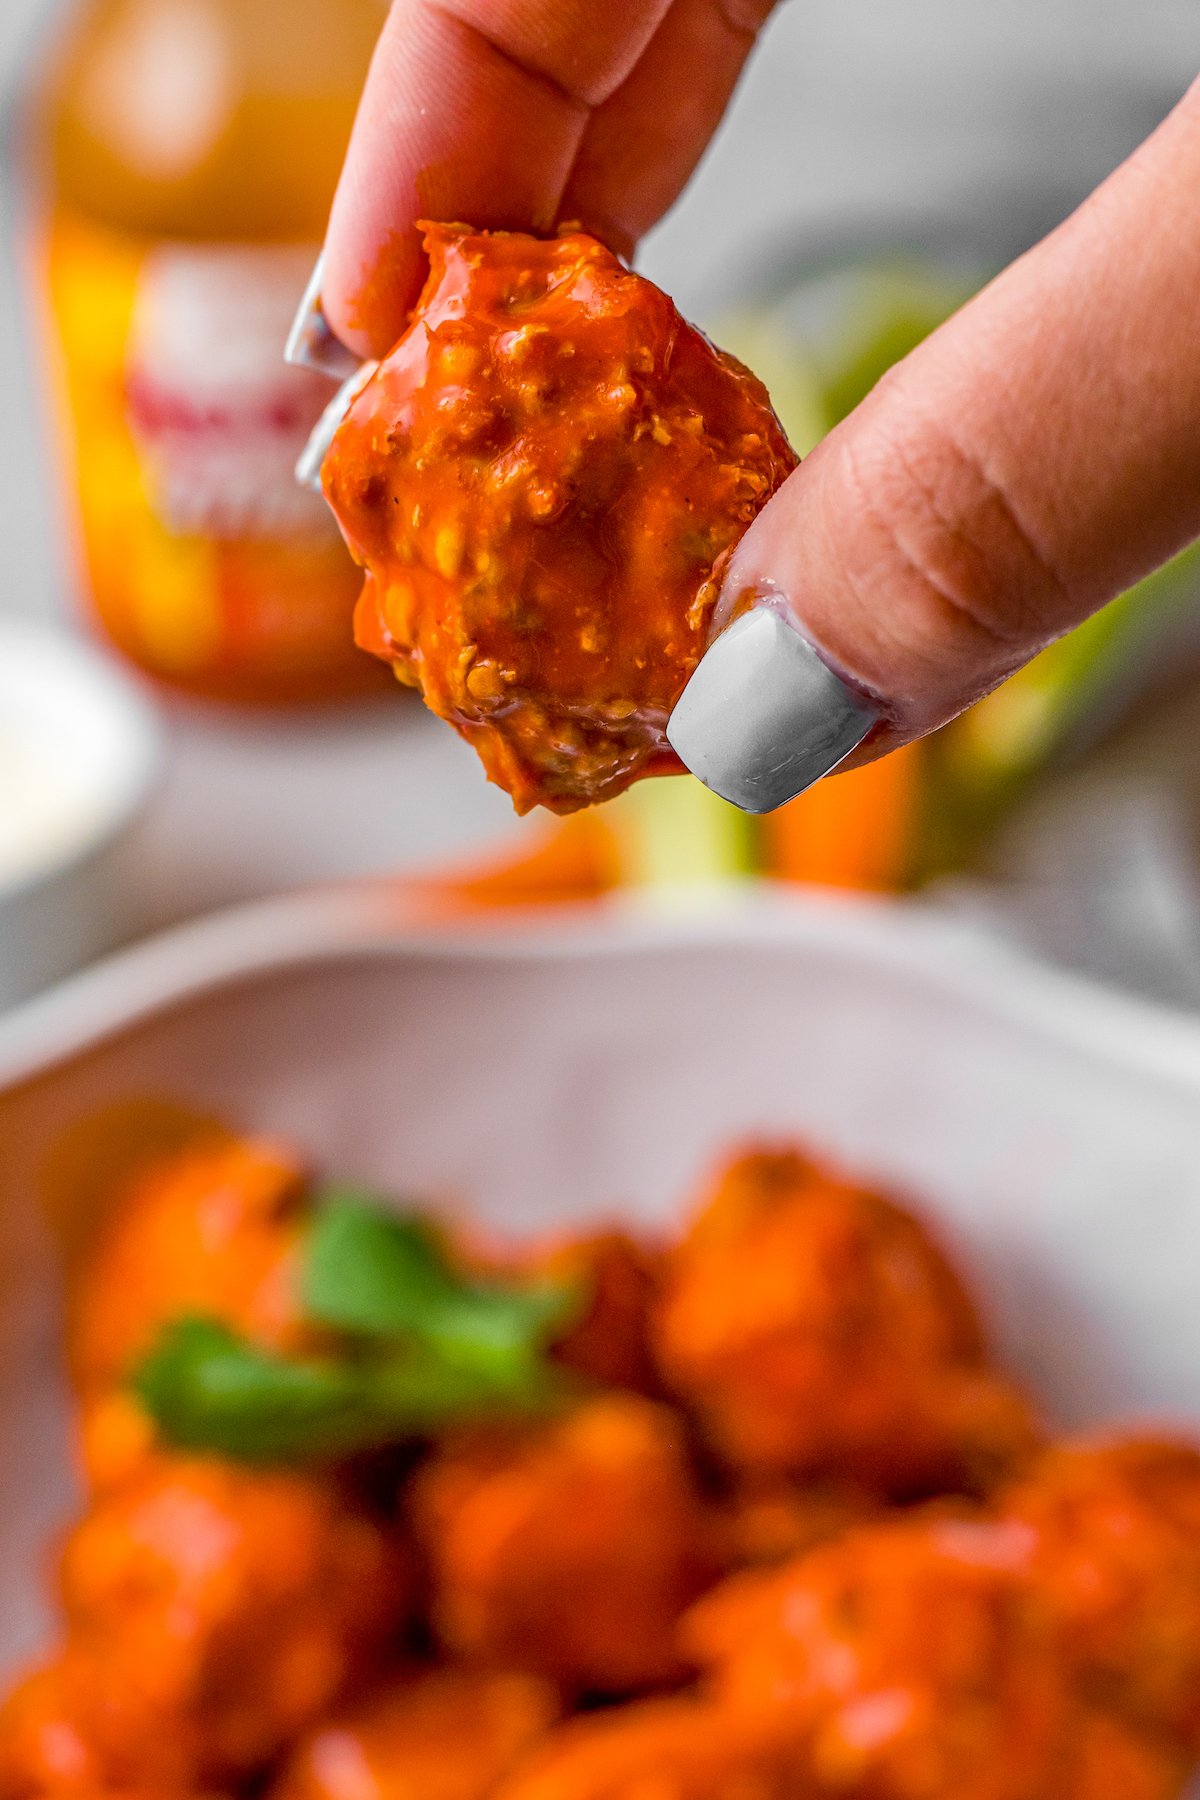 A hand holding one buffalo chicken meatball, to show texture.